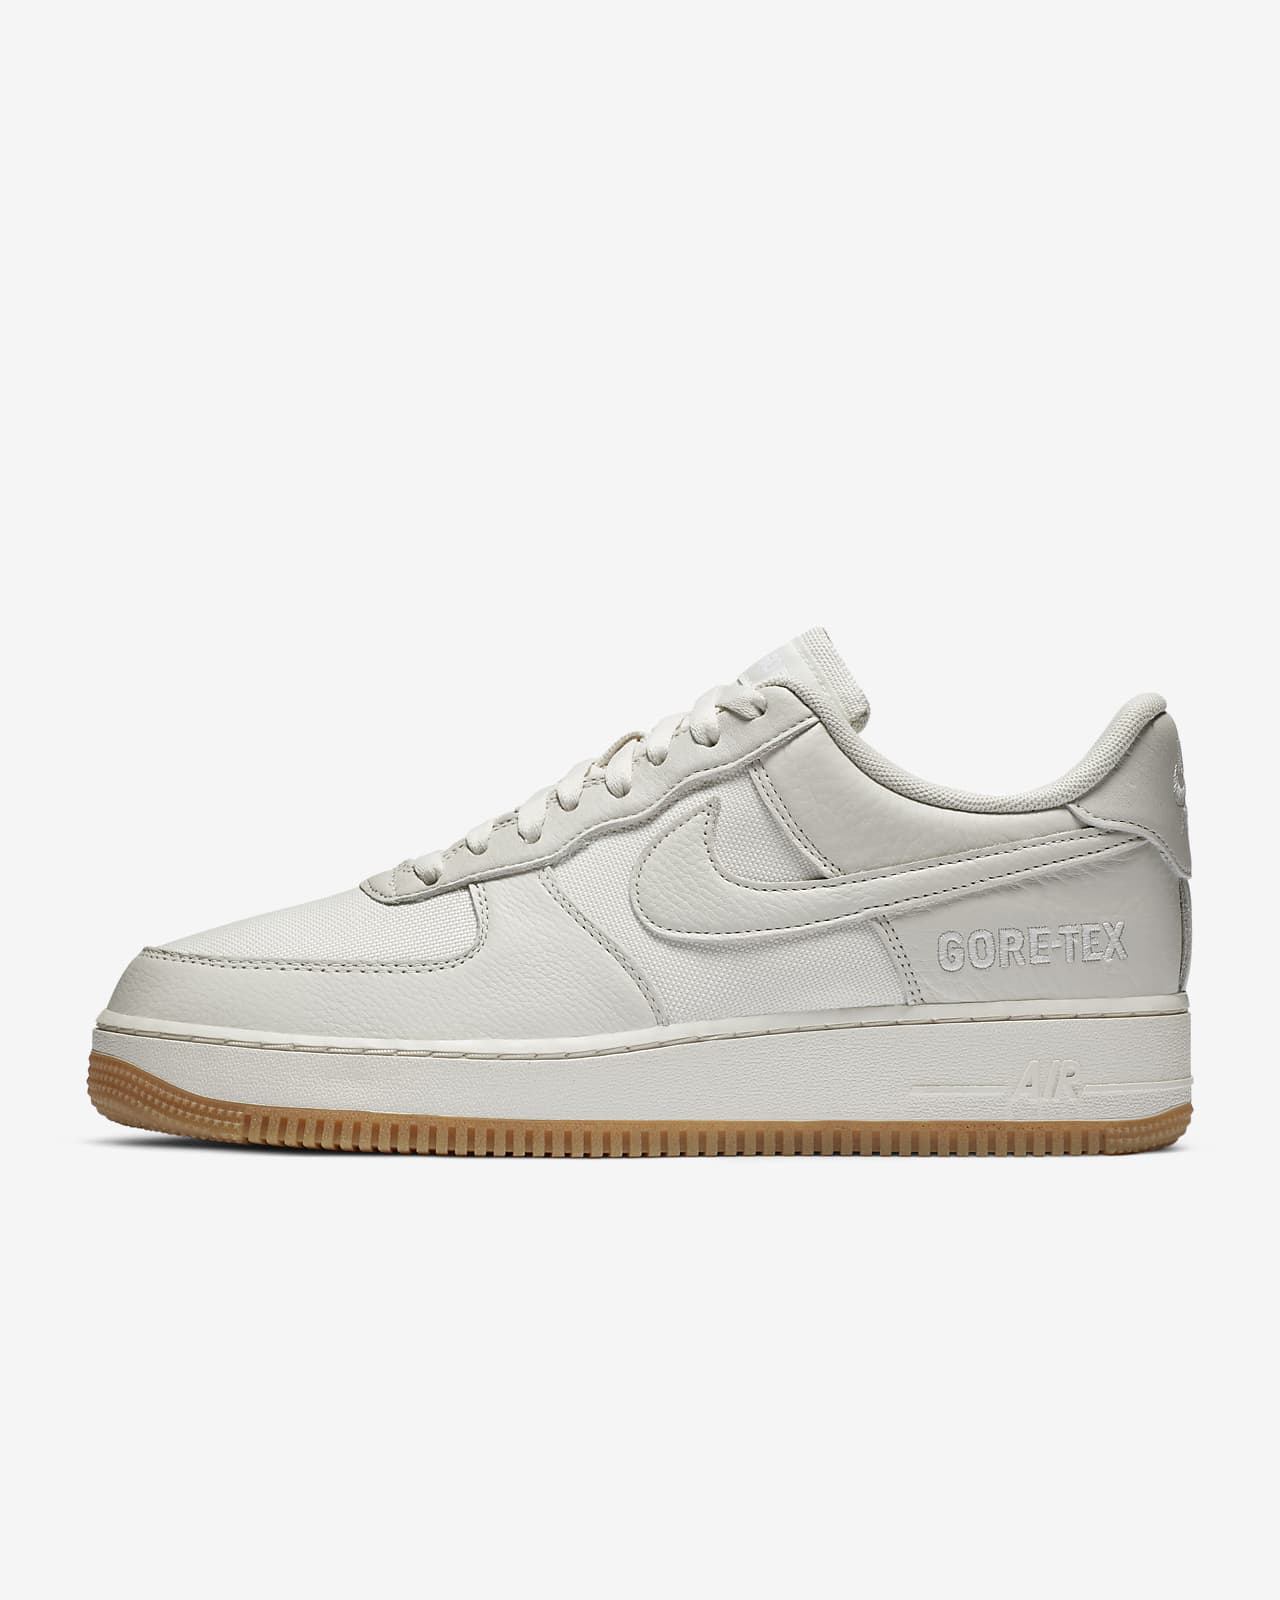 Chaussure Nike Air Force 1 Low GORE-TEX 